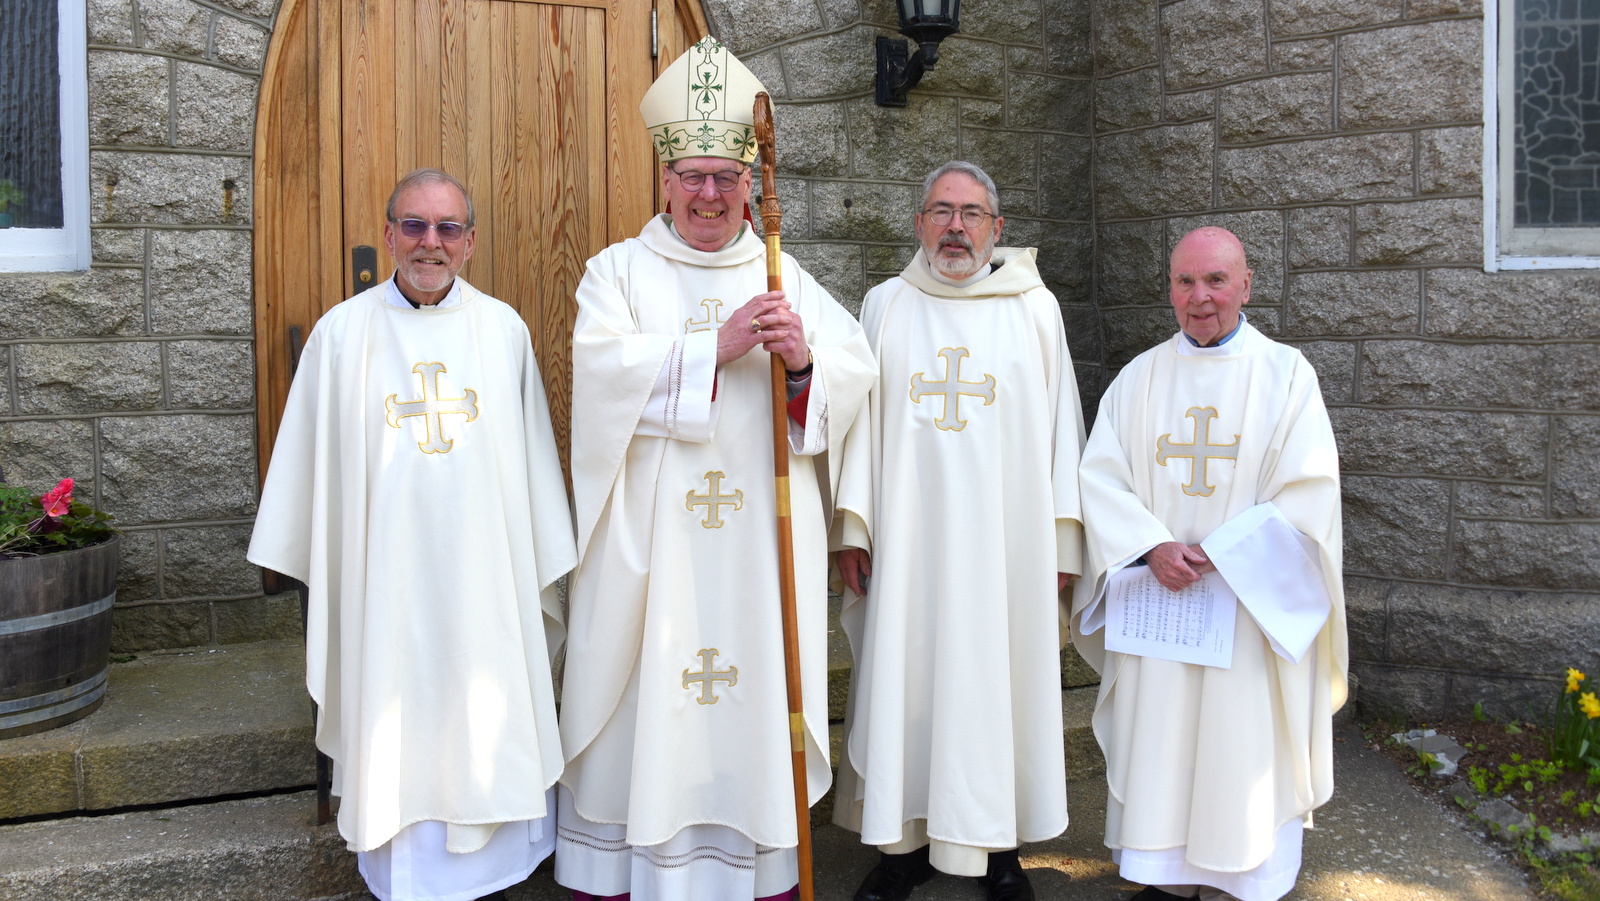 Father Frank Morin, Bishop Robert Deeley, Father Paul Sullivan and Father J. Joseph Ford